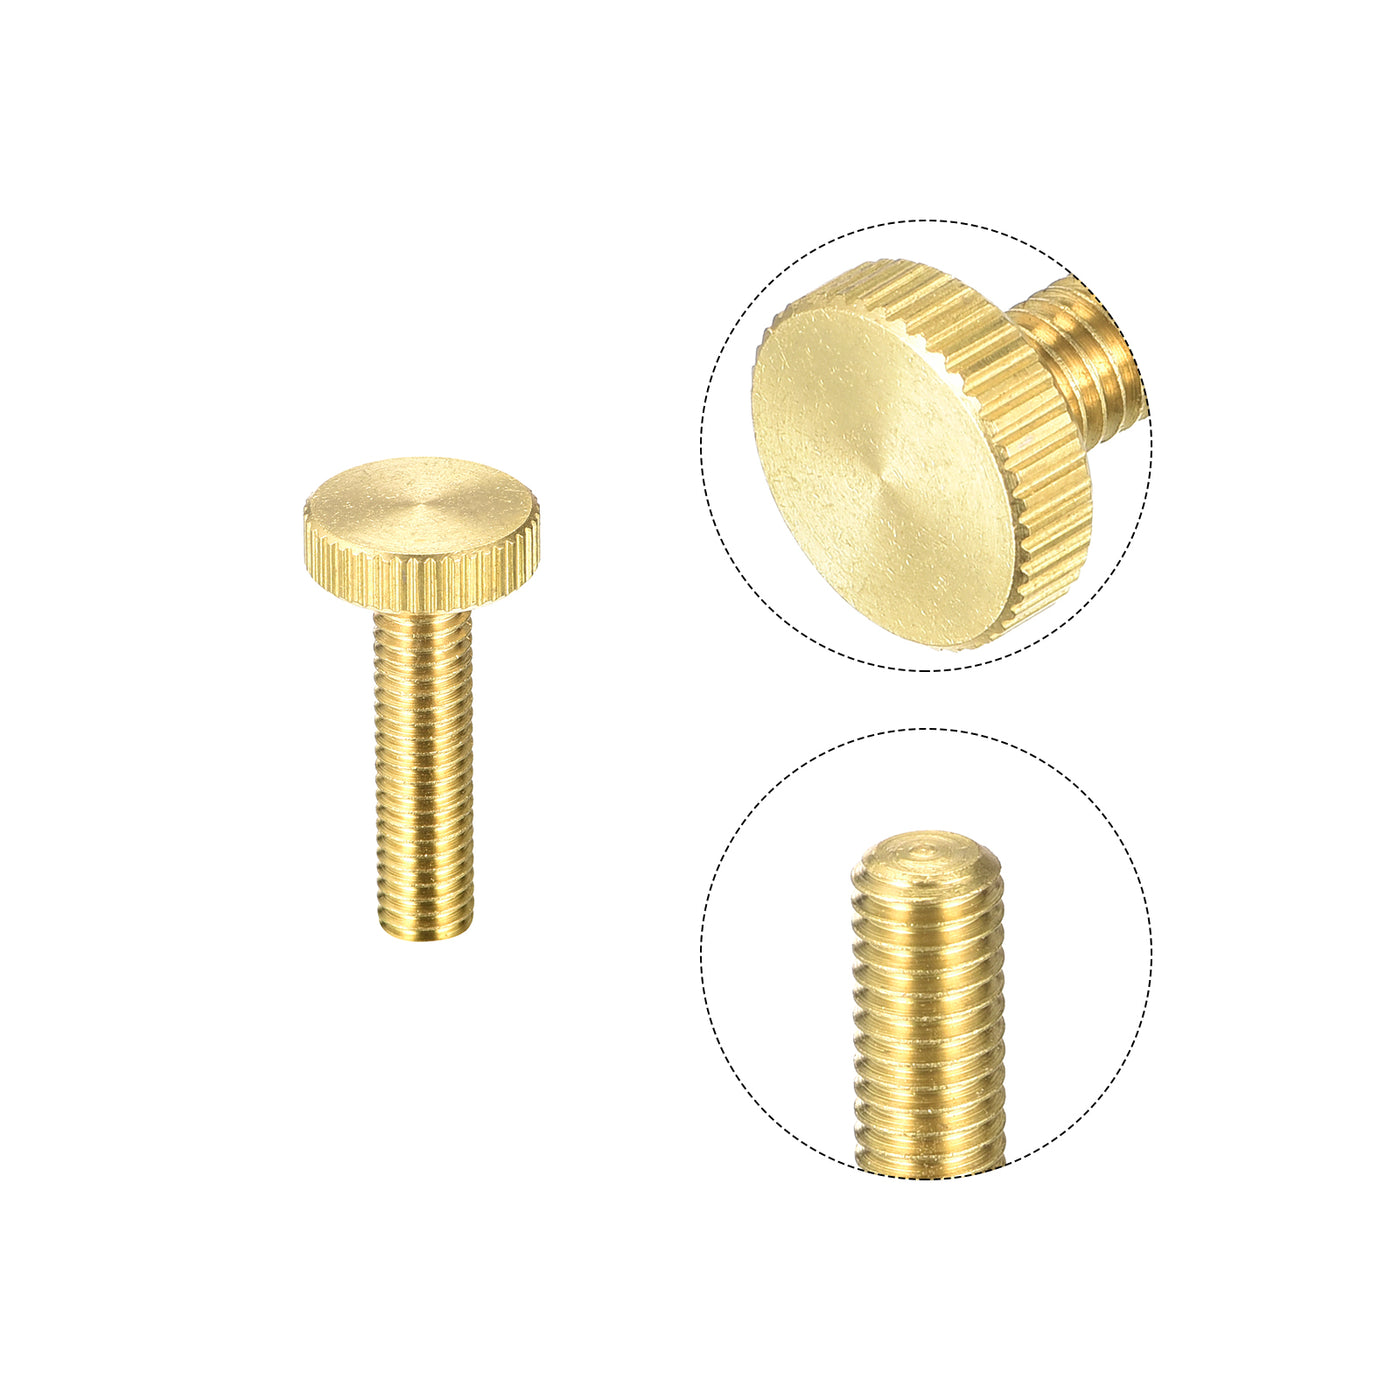 uxcell Uxcell Knurled Thumb Screws, M6x25mm Flat Brass Bolts Grip Knobs Fasteners for PC, Electronic, Mechanical 2Pcs